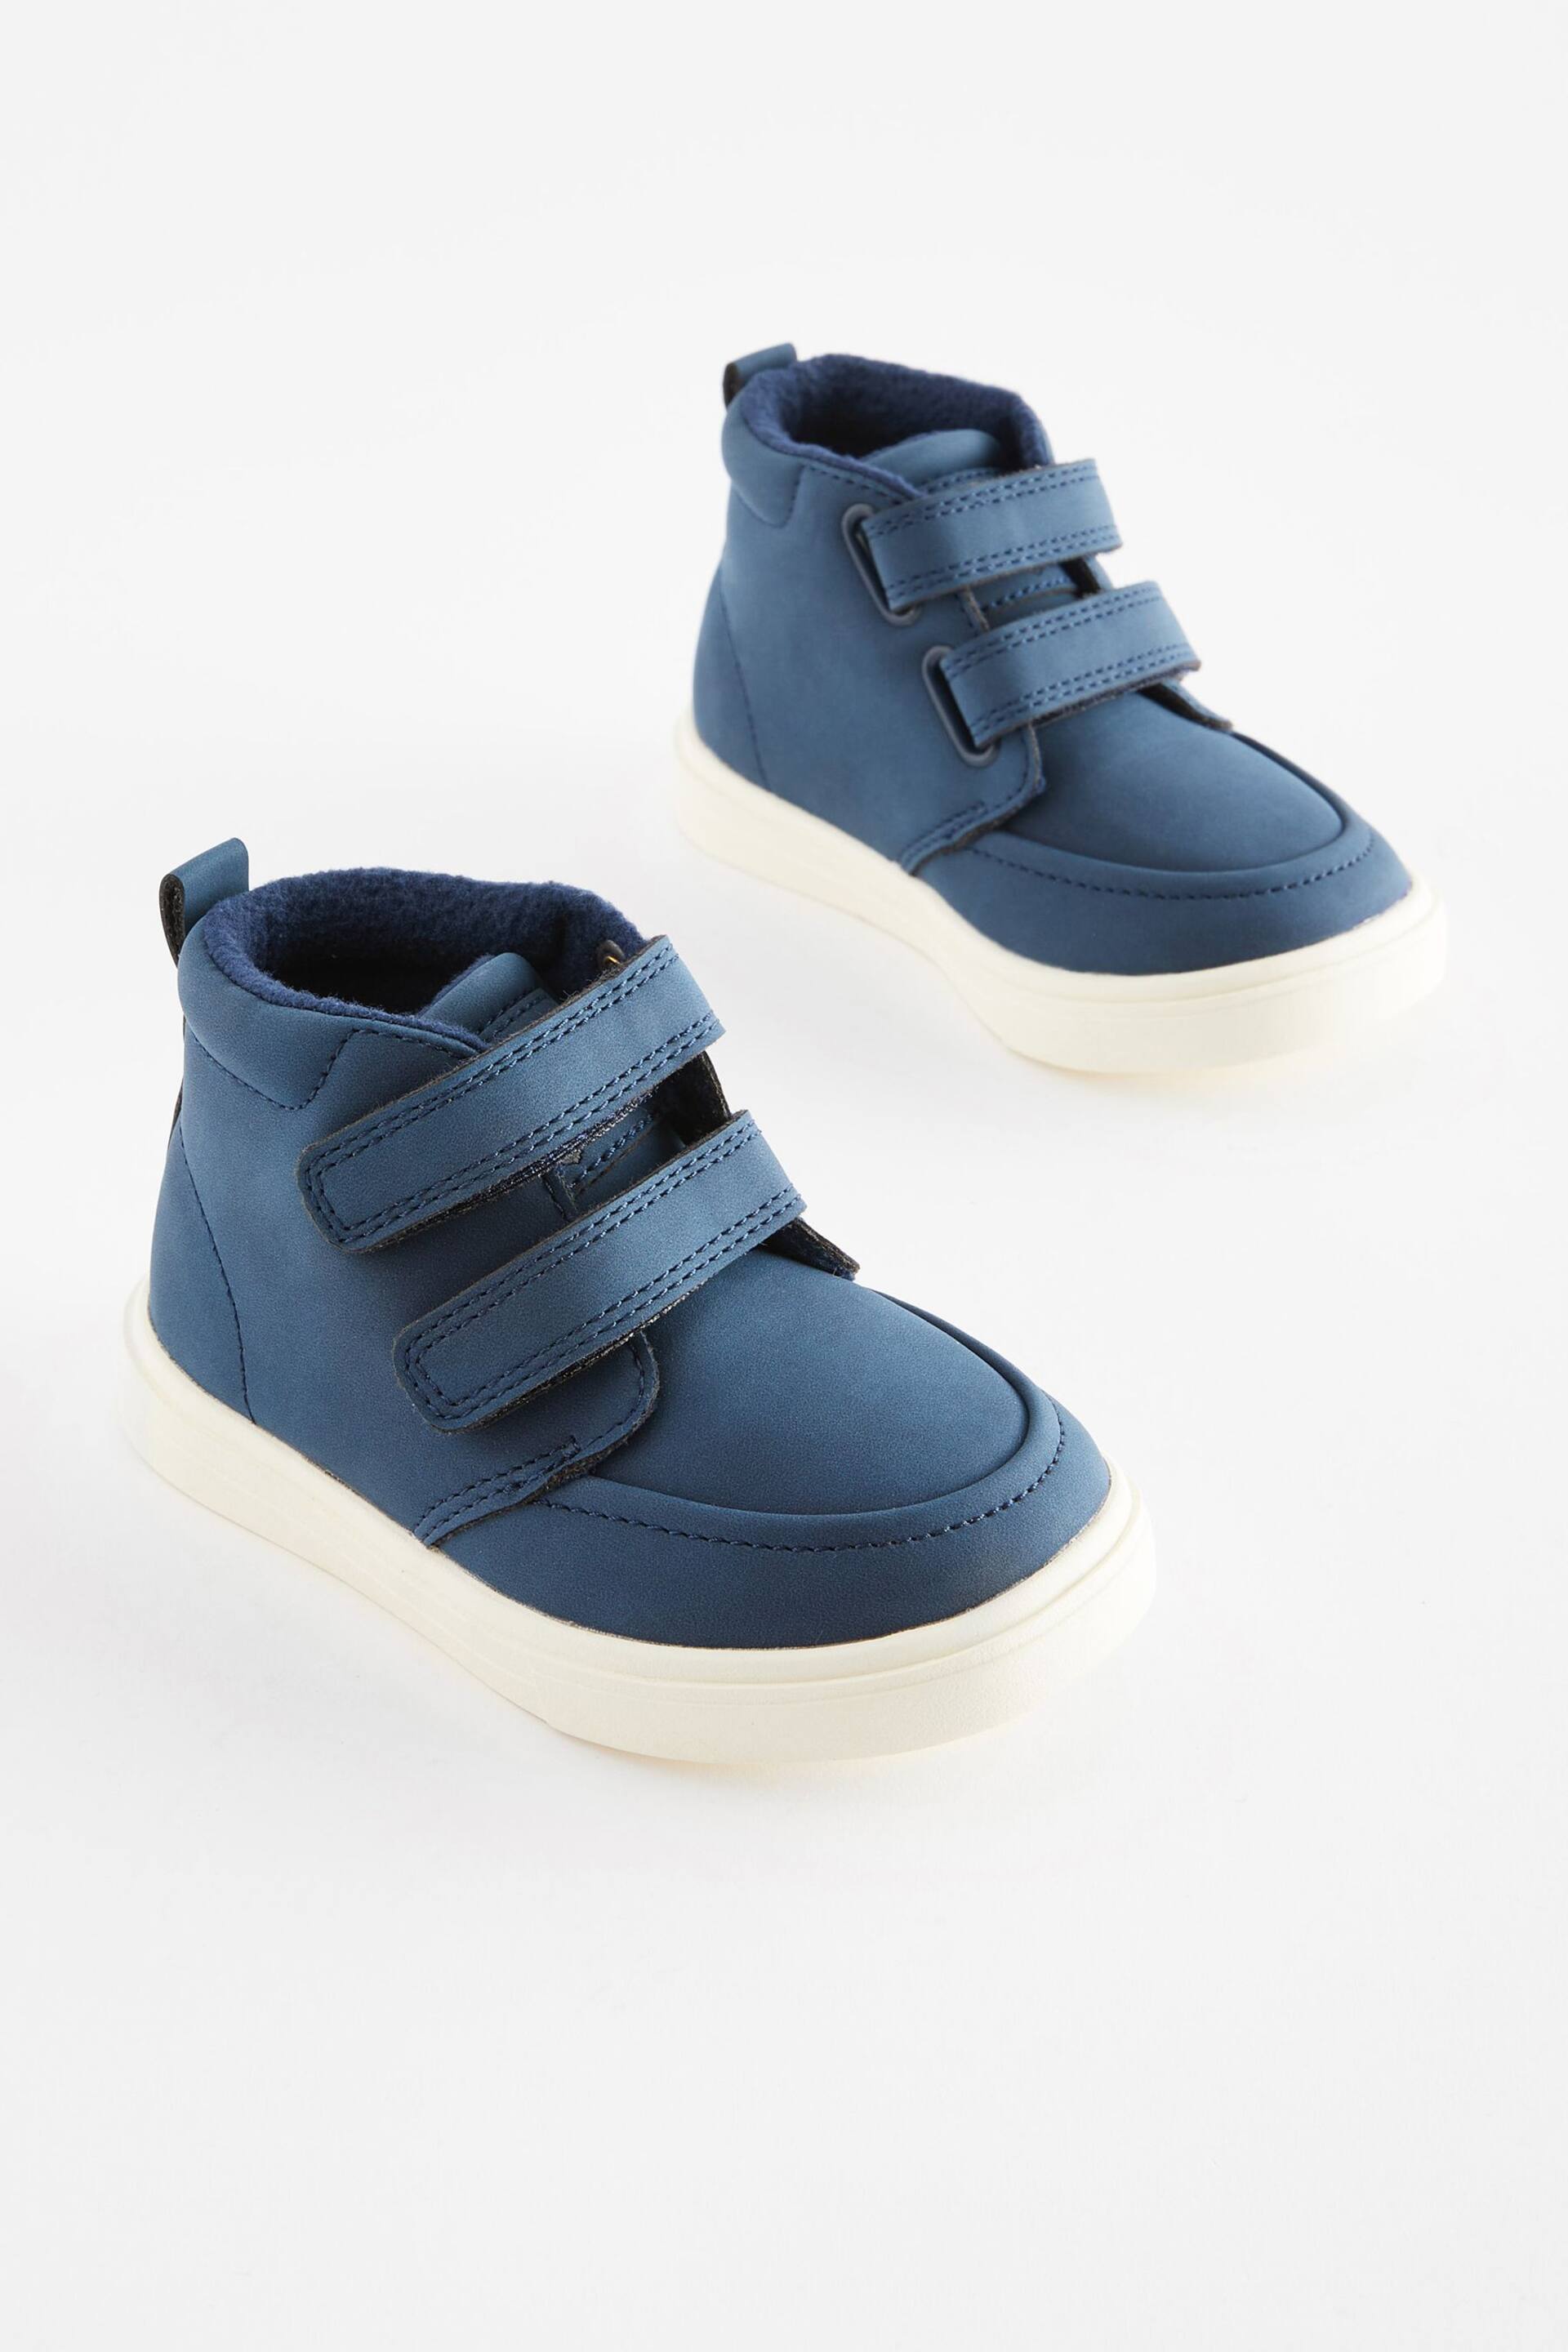 Navy Blue With Off White Sole Wide Fit (G) Warm Lined Touch Fastening Boots - Image 1 of 5